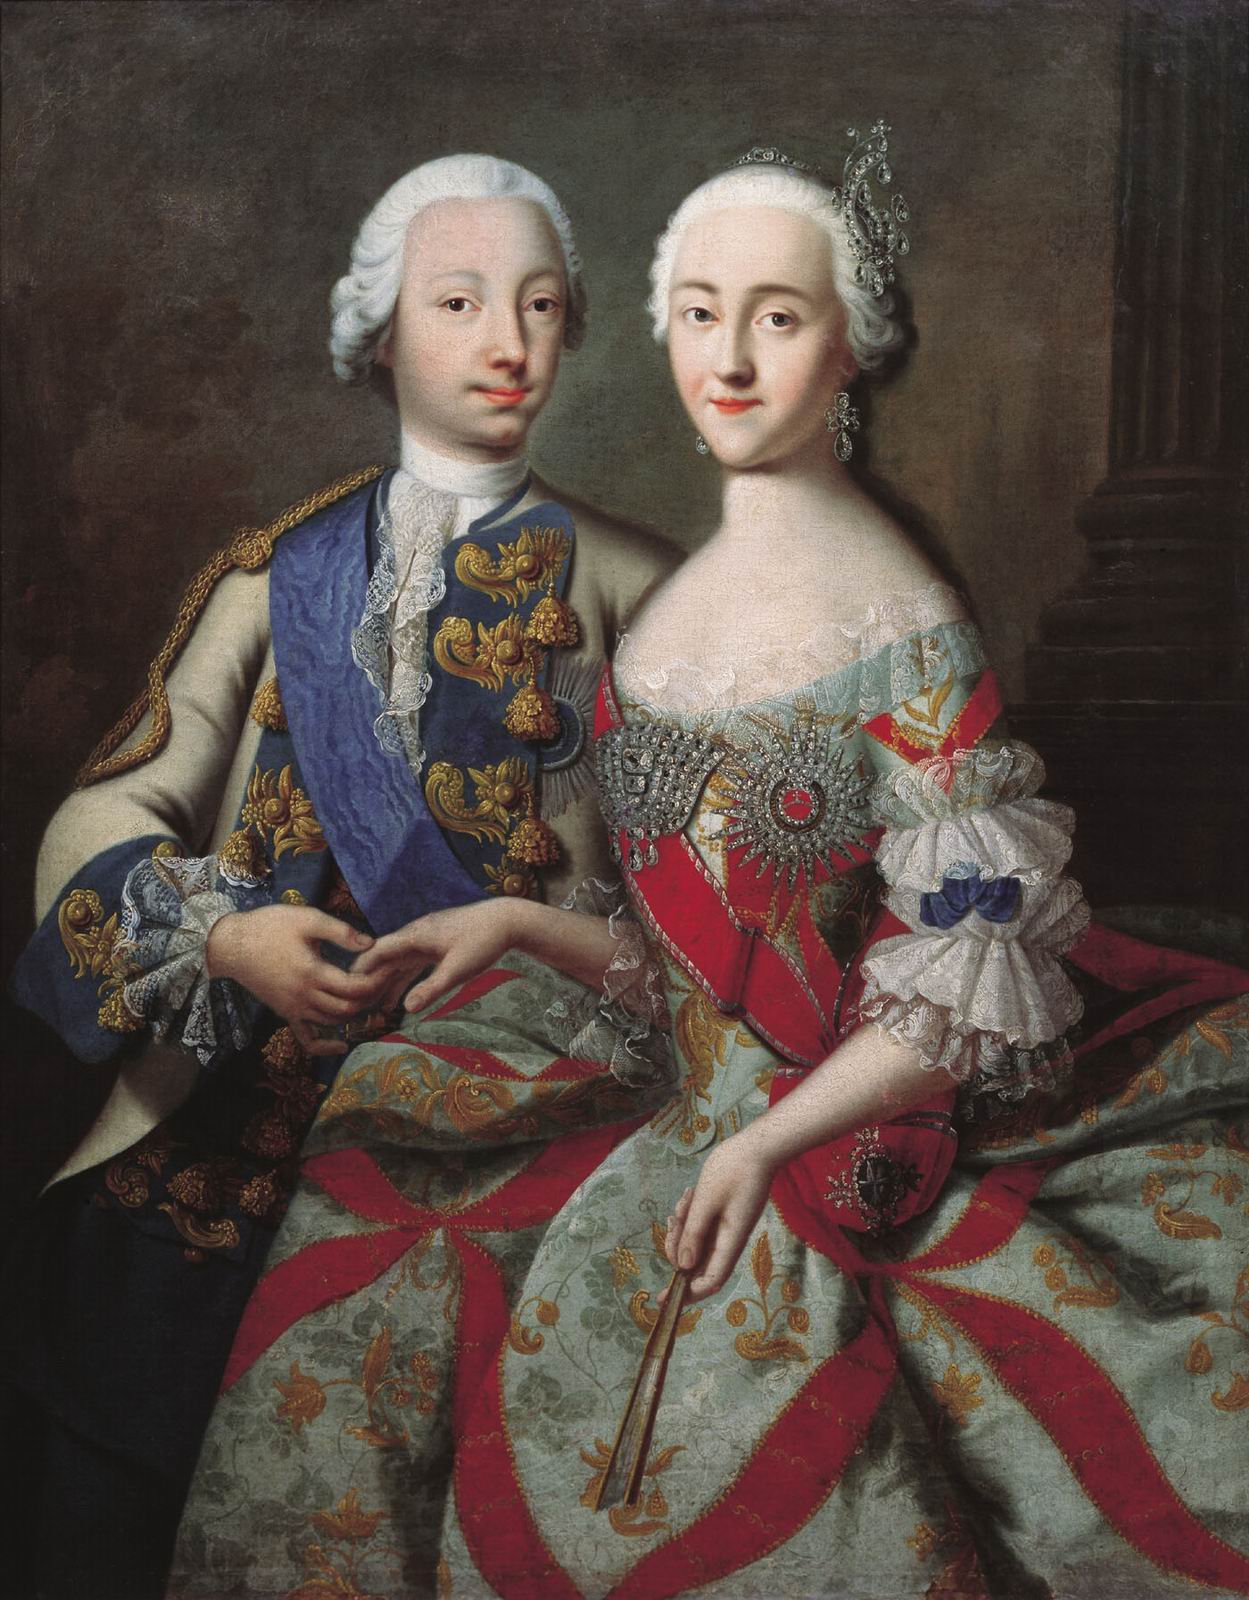 This painting depicts two royals in a formal dress. The man on the left is wearing a white robe and a blue sash, while the woman on the right is wearing a white dress with red trim. The two are standing in front of a dark background and holding hands.